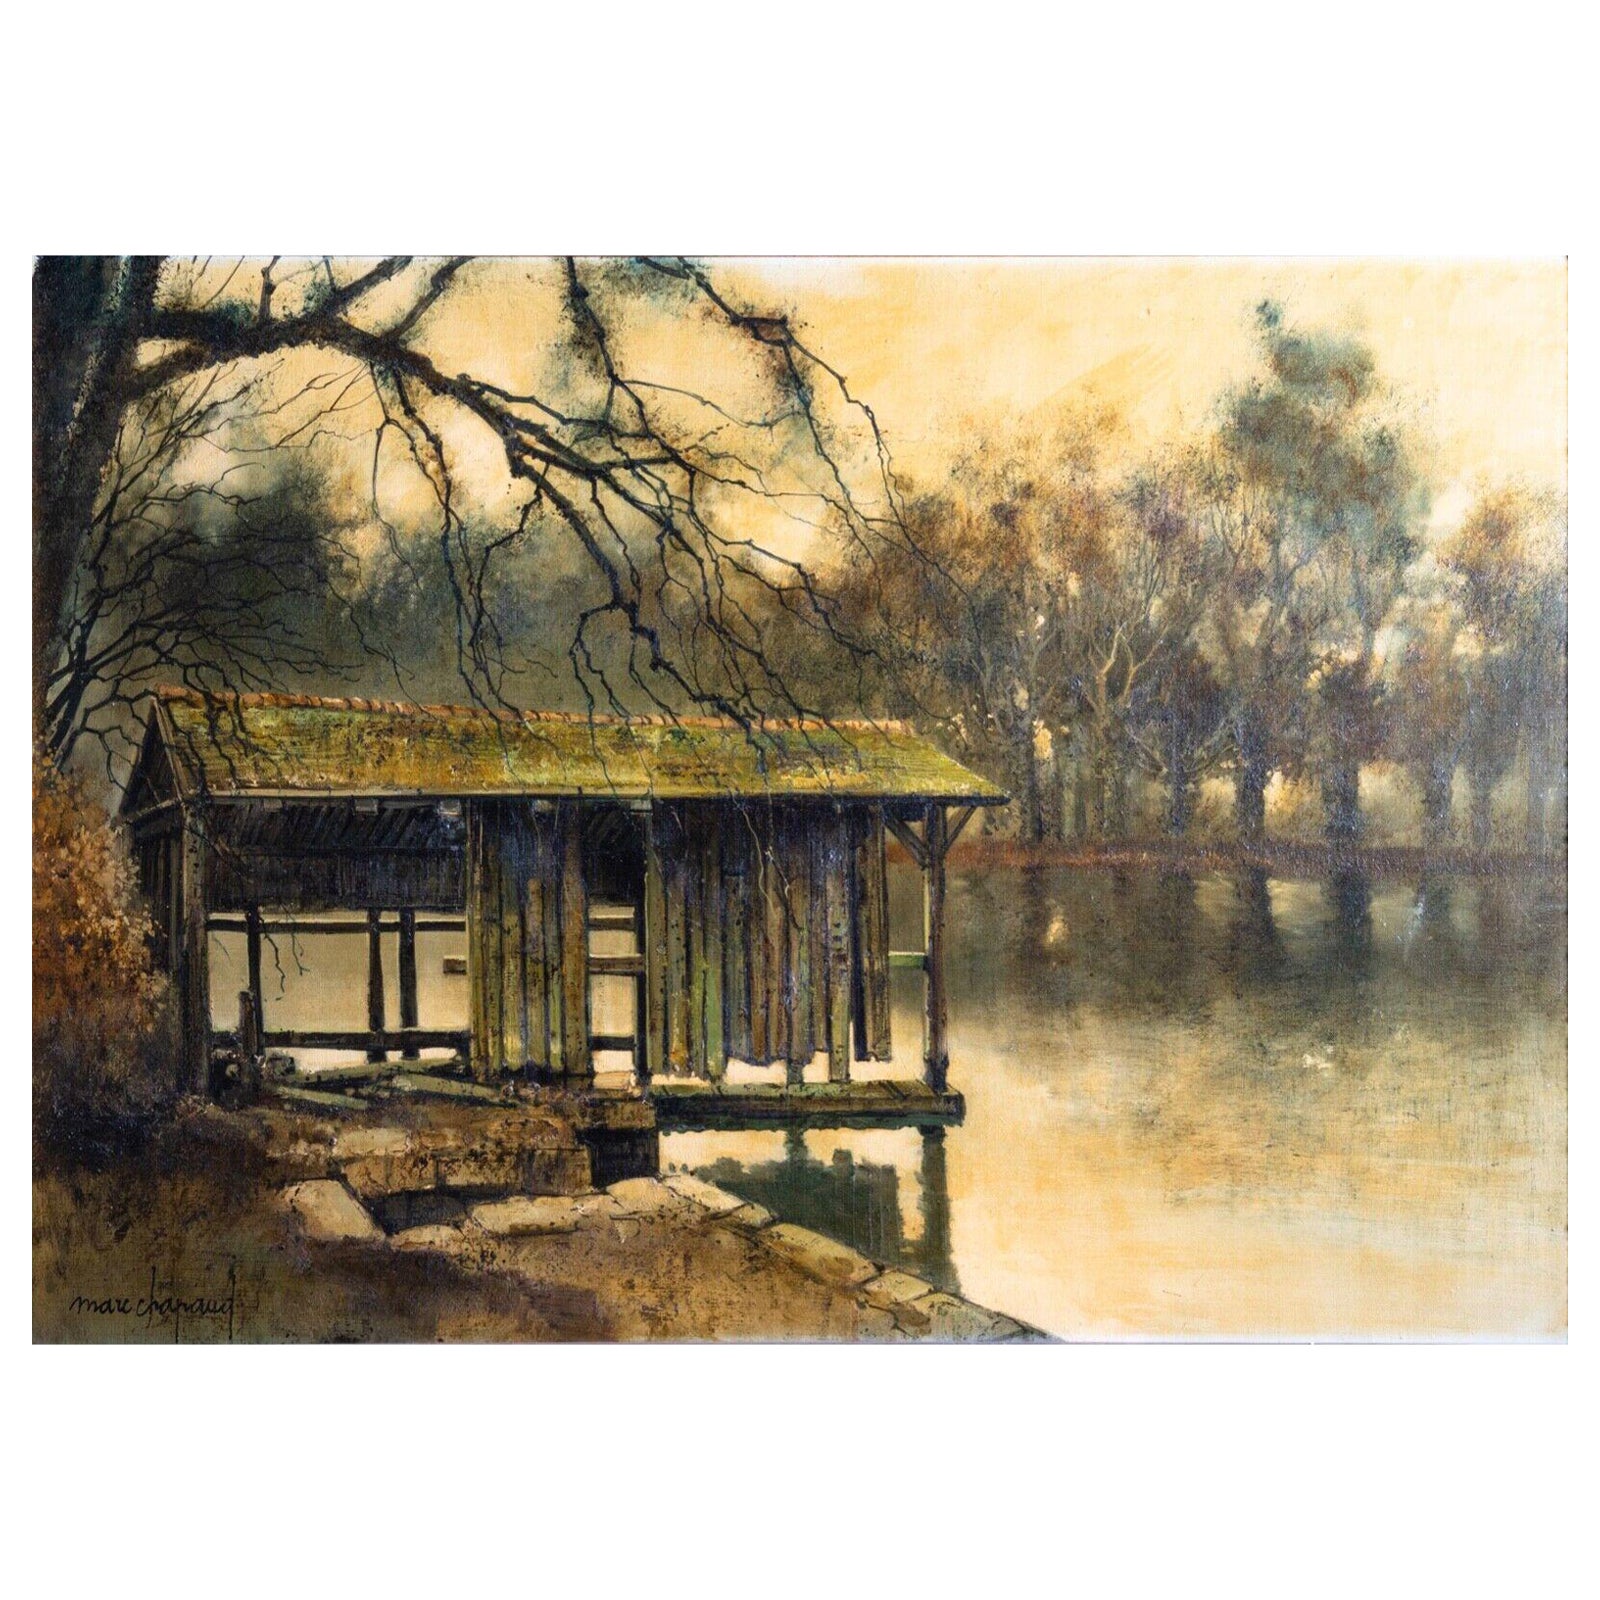 Marc Capaud Etang at Sologne Signed 1975 Oil Painting on Canvas French Landscape For Sale